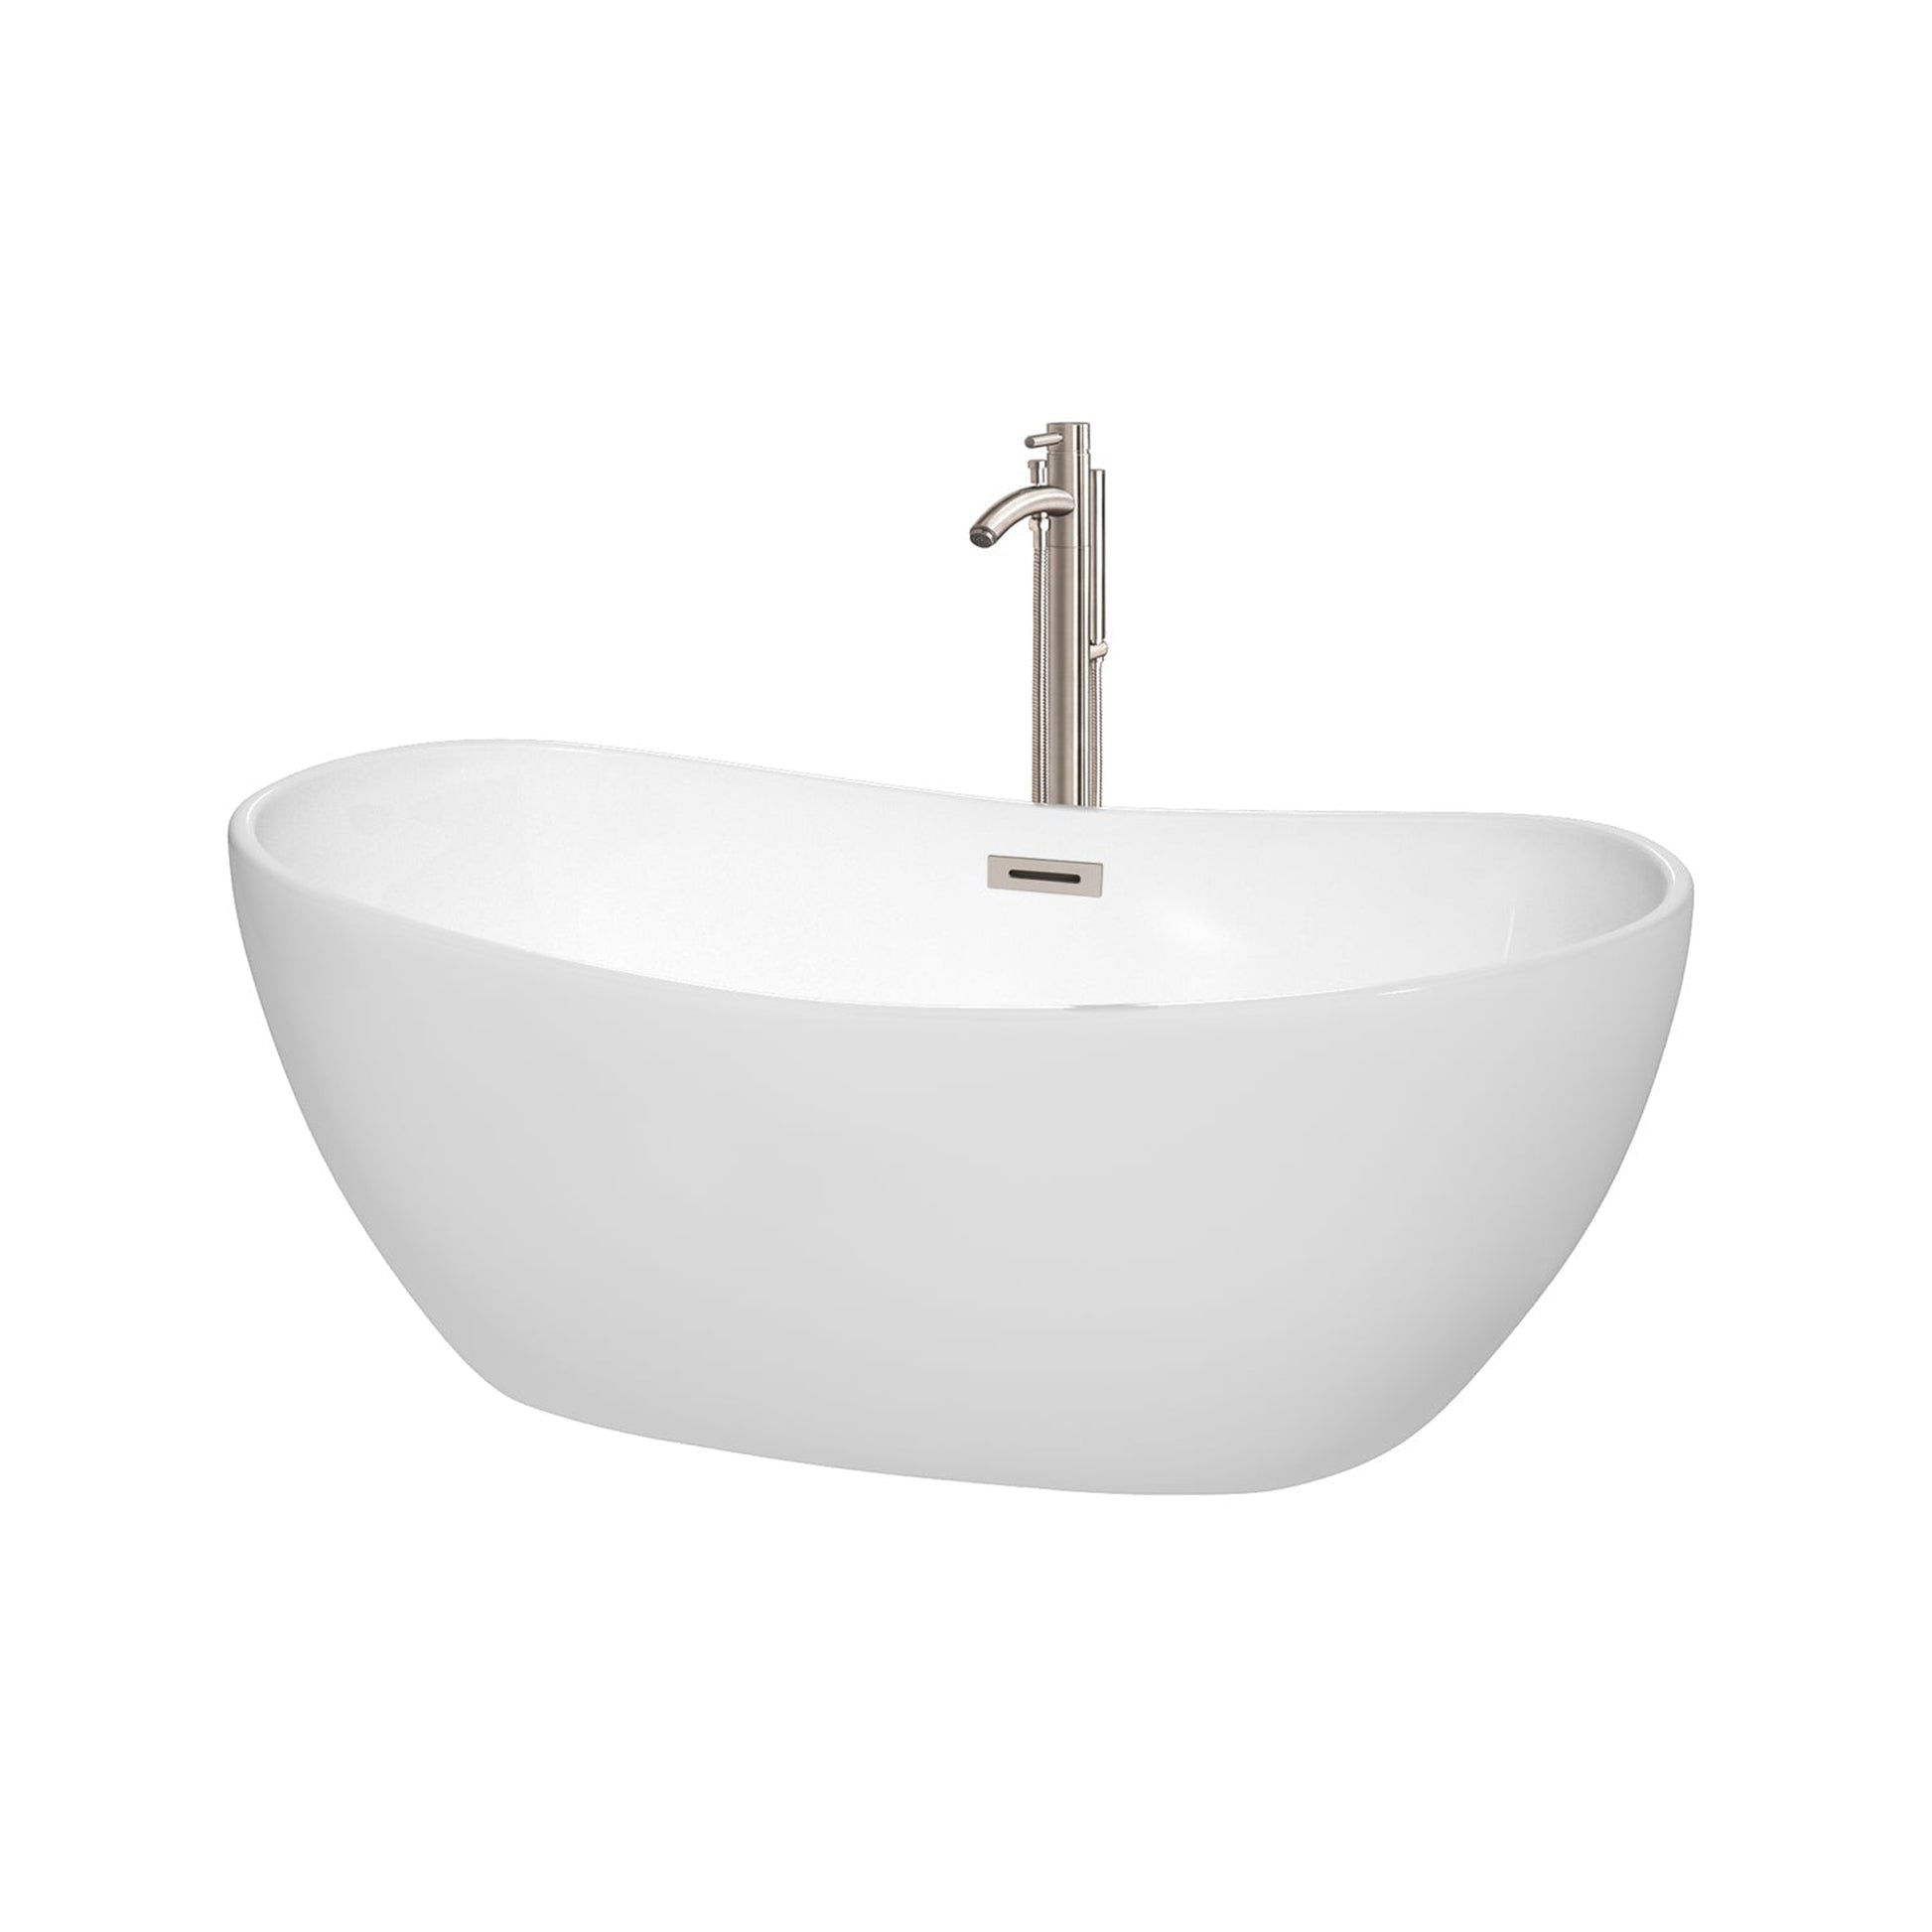 Wyndham Collection Rebecca 60" Freestanding Bathtub in White With Floor Mounted Faucet, Drain and Overflow Trim in Brushed Nickel